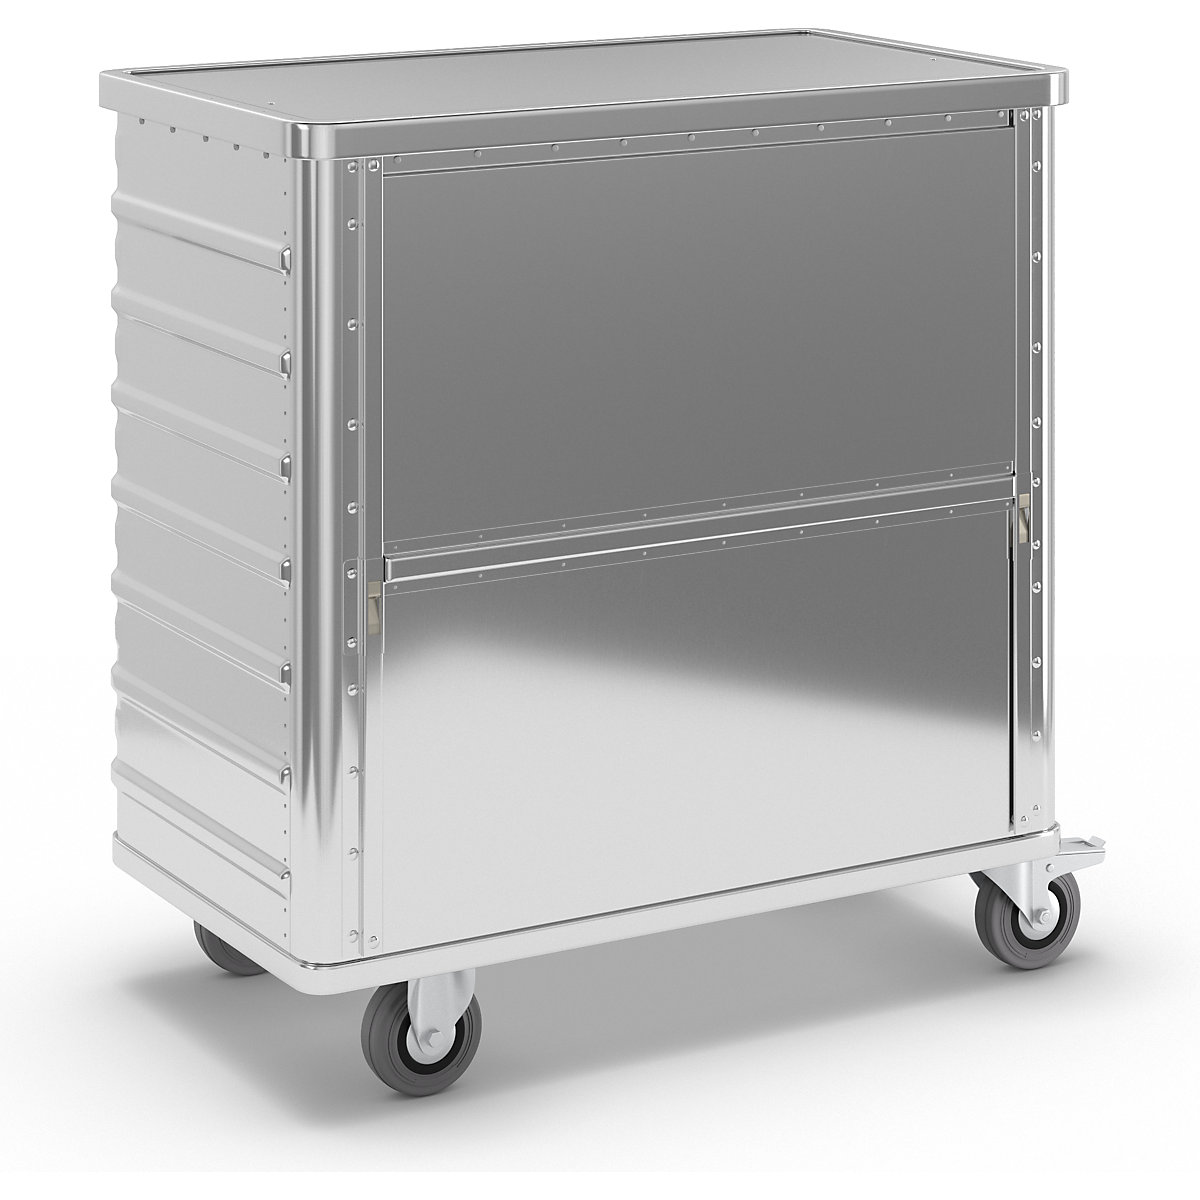 Aluminium container truck, fold down side panel - Gmöhling